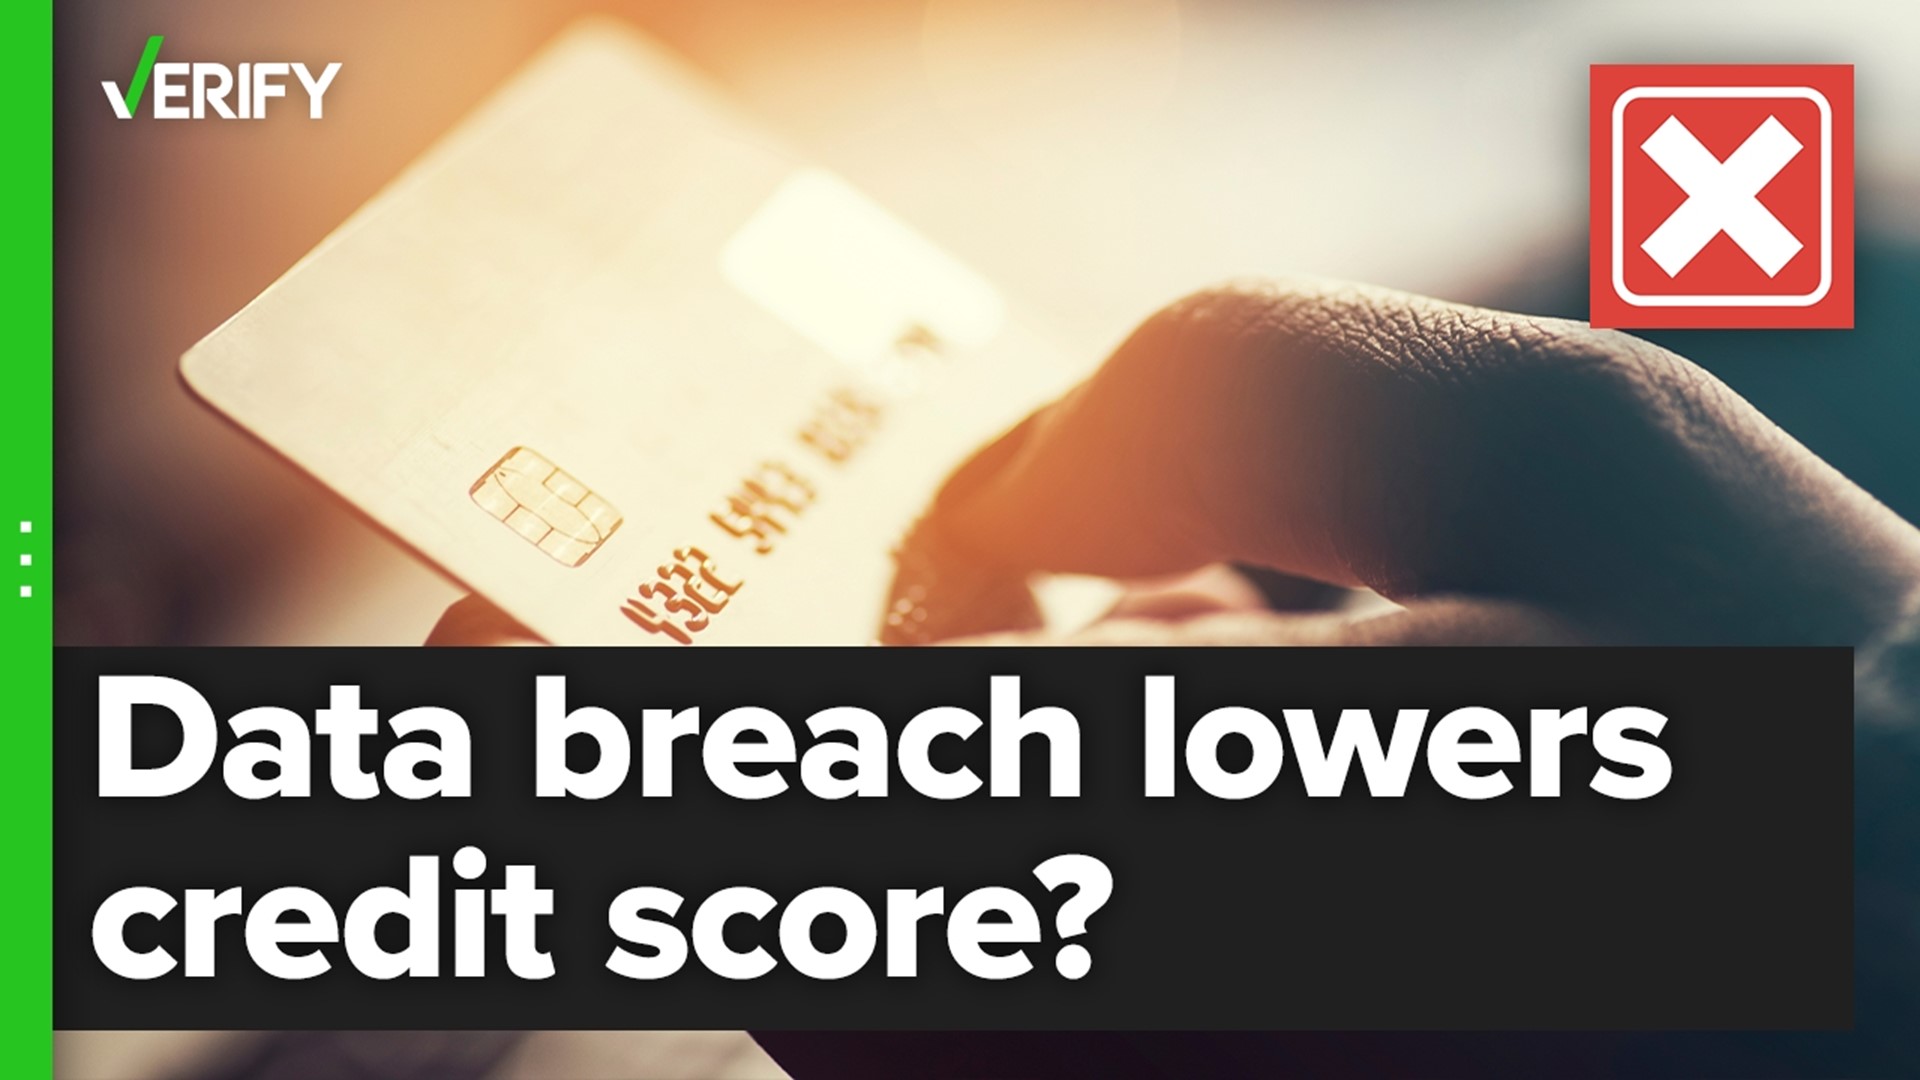 Data breaches on their own aren’t factored into credit scores. But scammers using leaked data to open a new line of credit could trigger a drop in your score.